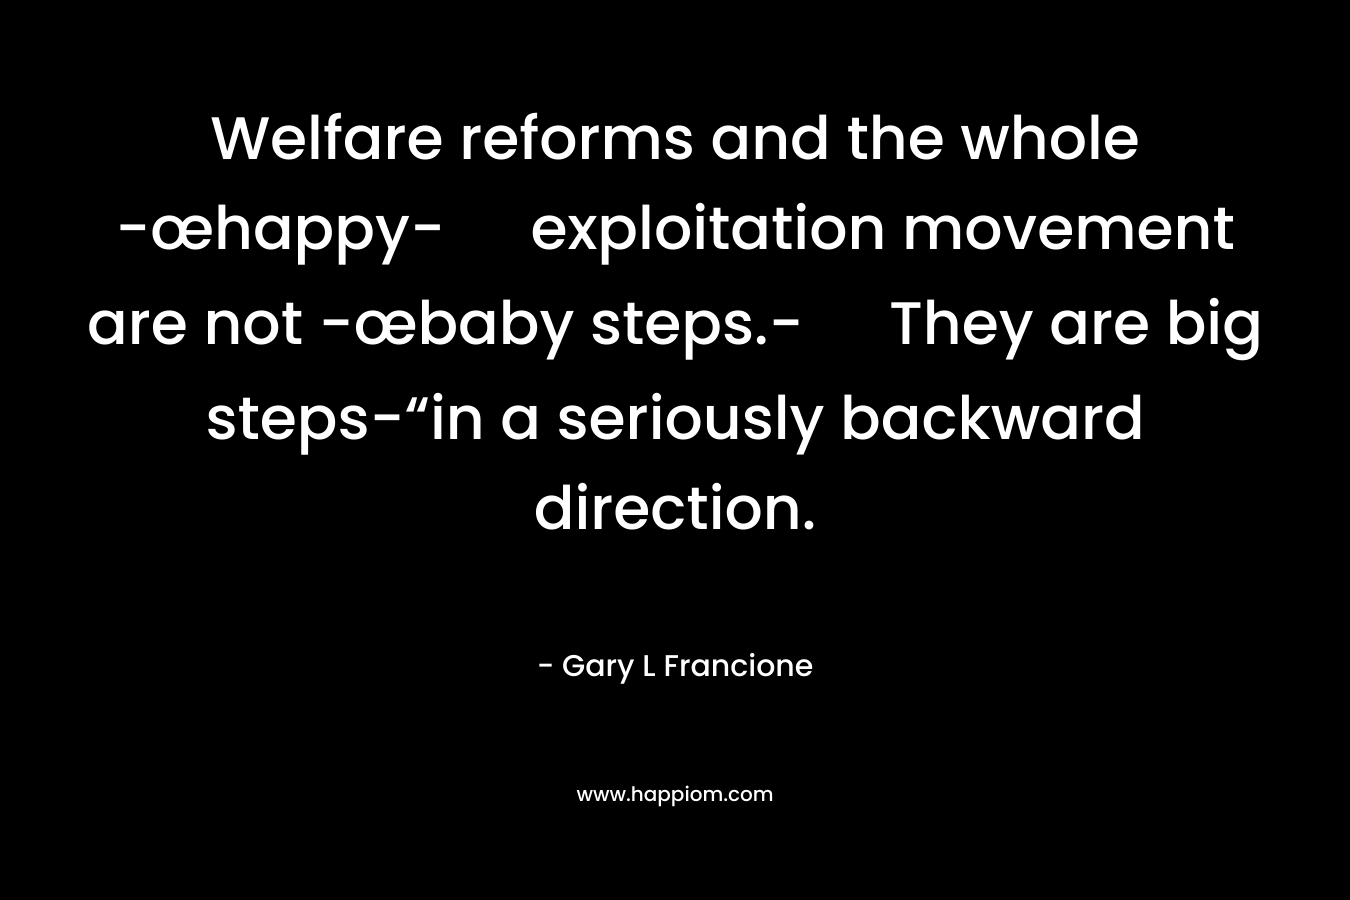 Welfare reforms and the whole -œhappy- exploitation movement are not -œbaby steps.- They are big steps-“in a seriously backward direction.